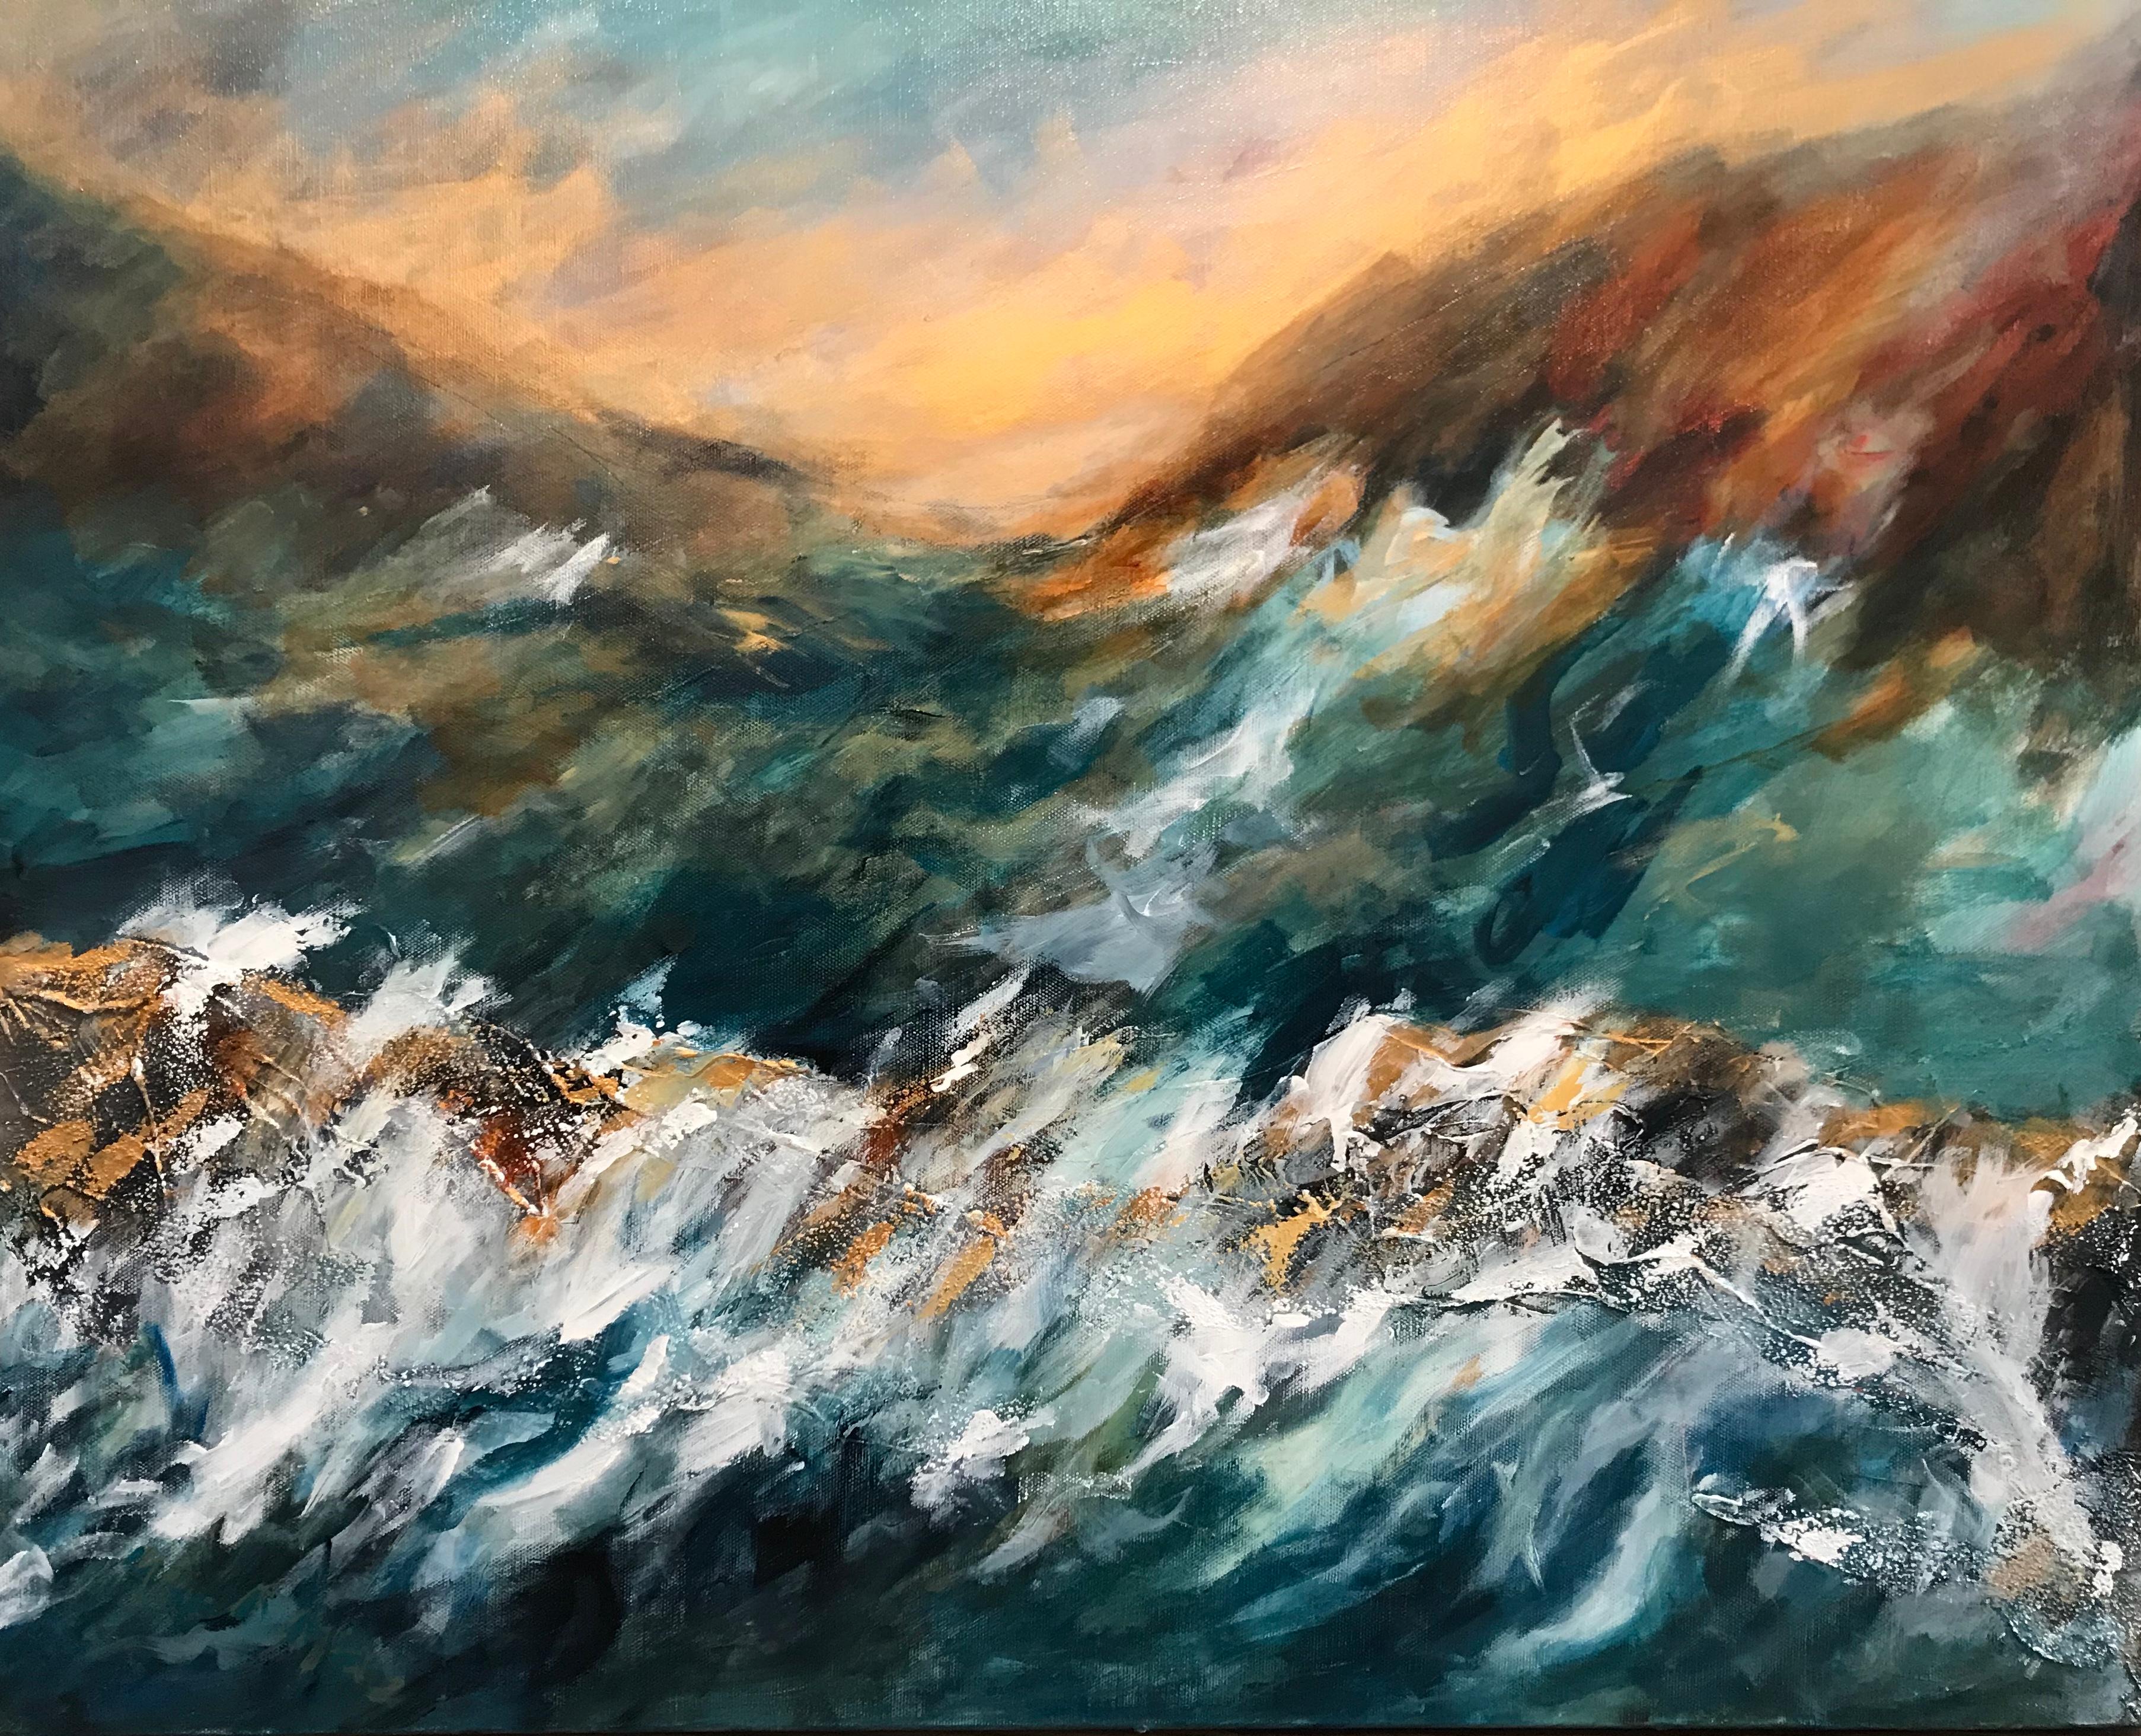 91 x 122cm unframed

Contemporary seascape painting by Mark MacCallum.

Mark McCallum was born in North Yorkshire in 1964 and he studied at St Johns in York where he graduated in 1988 with a BA Honors degree in Fine Art and Media Studies,